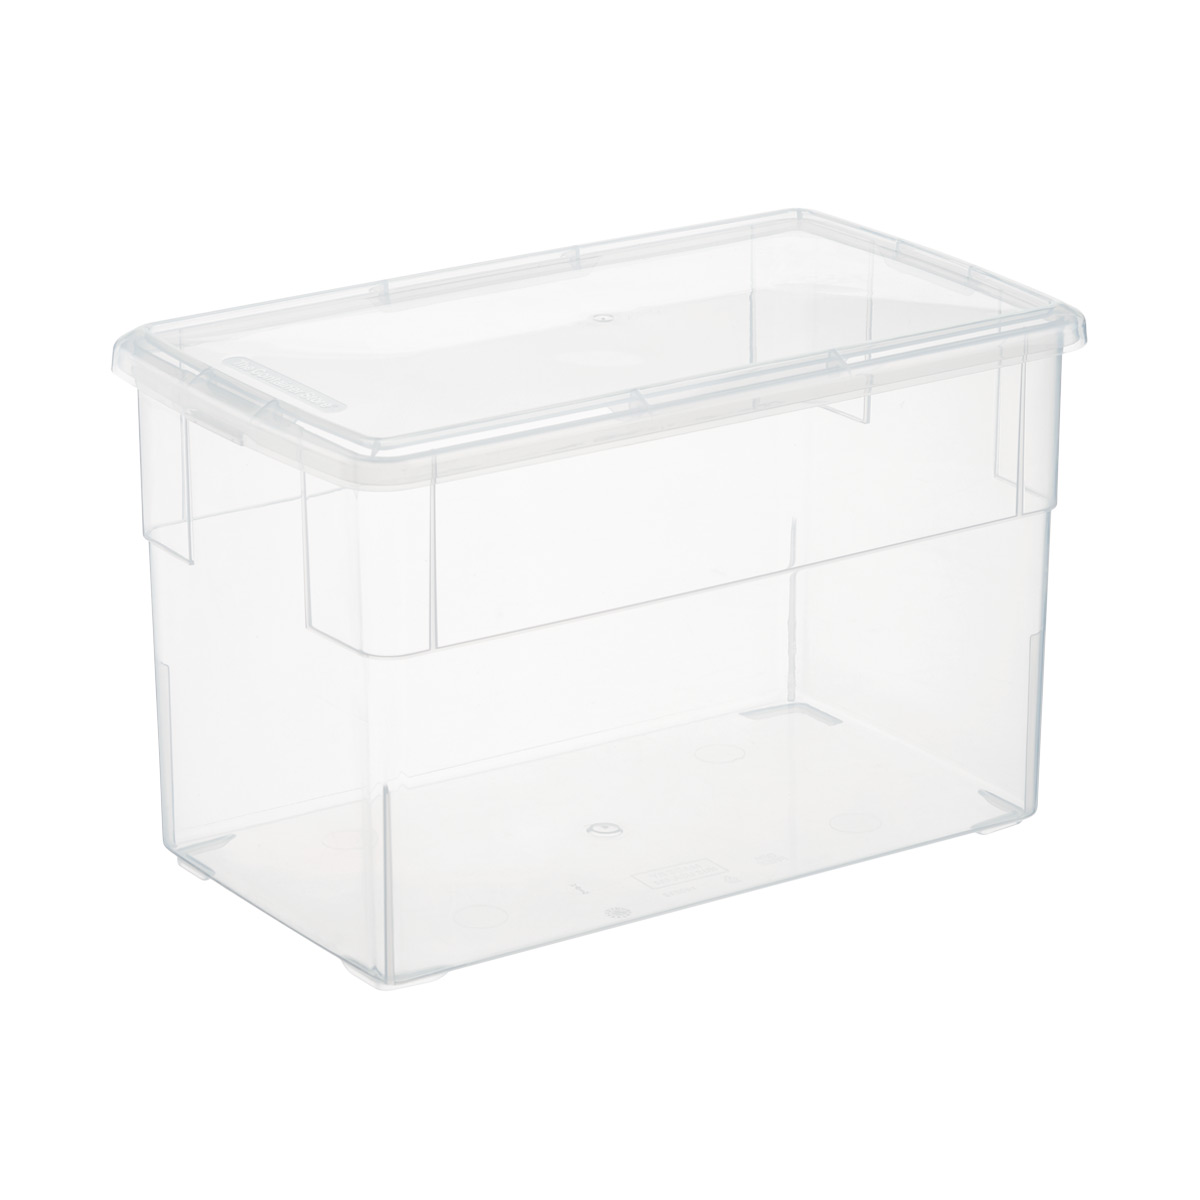 URBNLIVING Large Mano Black Plastic Storage Box With Clip On Lids 1, 20 Litre 